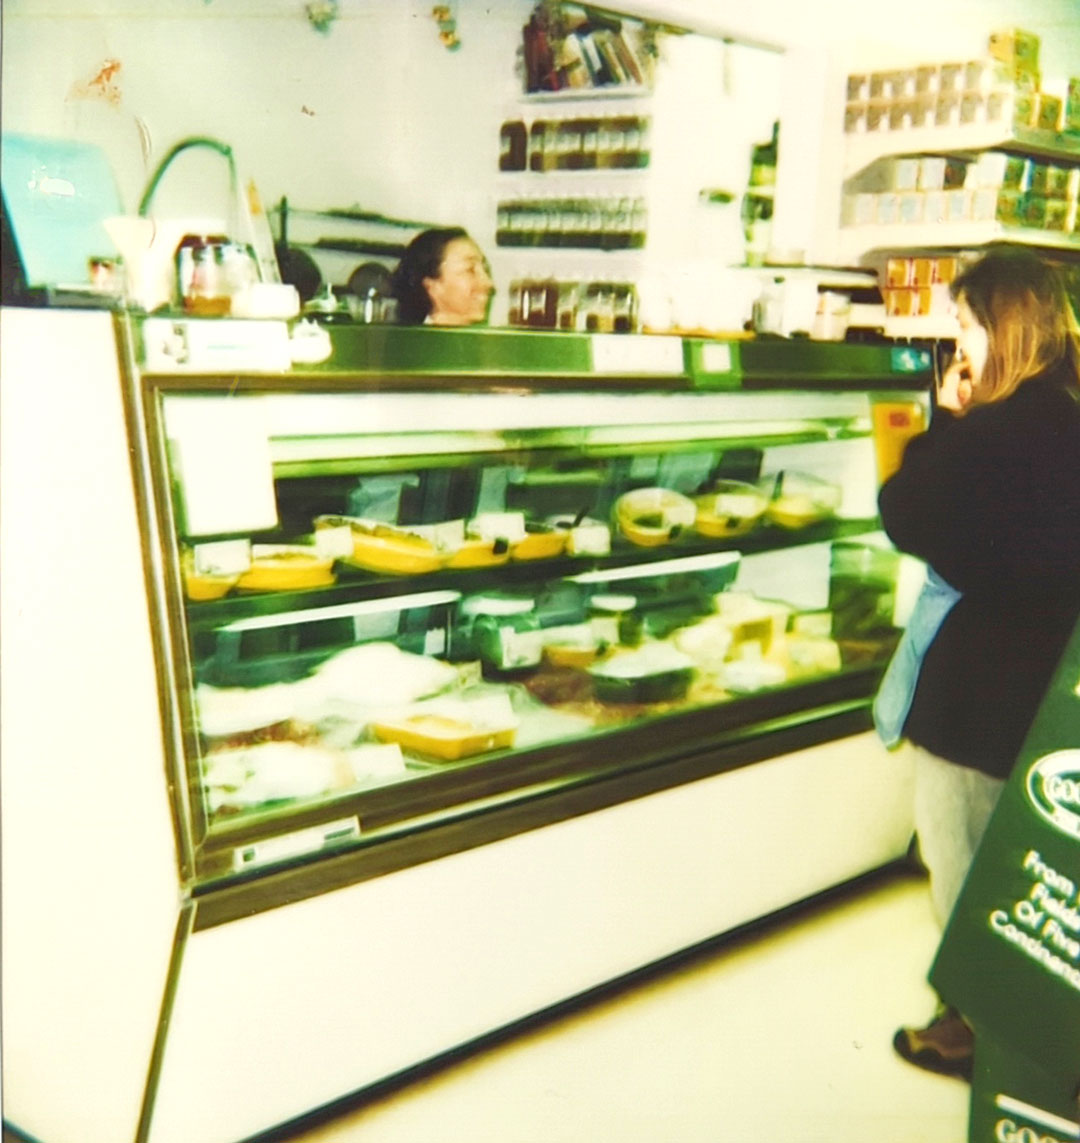 A woman stands at the counter of a grocery store or deli, engaging in conversation with a staff member behind the display case filled with various cheeses and deli items. Shelves stocked with jars and packaged goods are visible in the background, reminiscent of Whole Foods Coop Duluth MN.